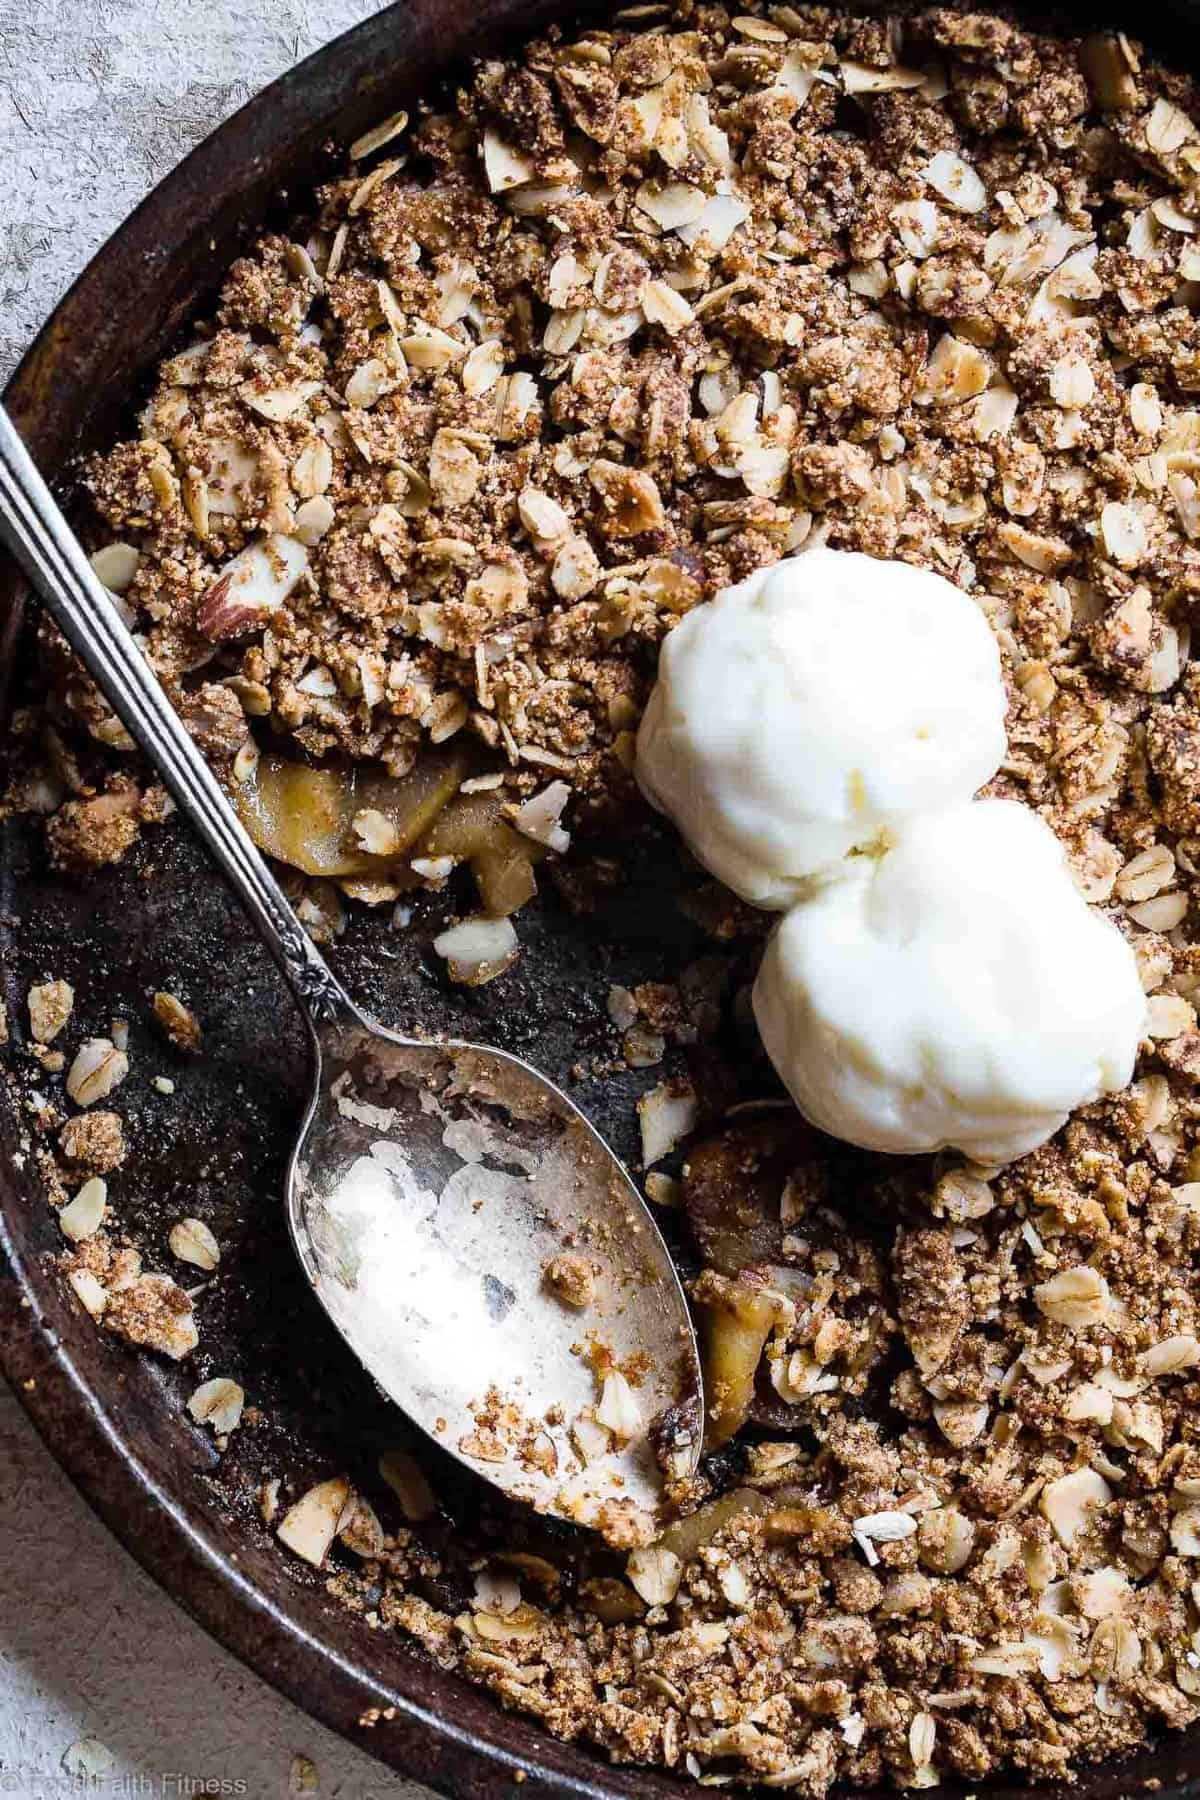 Easy Vegan Gluten Free Apple Crisp - Made with SUPER simple, wholesome ingredients and is perfectly spicy-sweet and yummy! The perfect, cozy fall dessert that you will never believe is gluten/dairy/egg free and healthy! | #Foodfaithfitness | #Glutenfree #Vegan #Dairyfree #Healthy #Eggfree